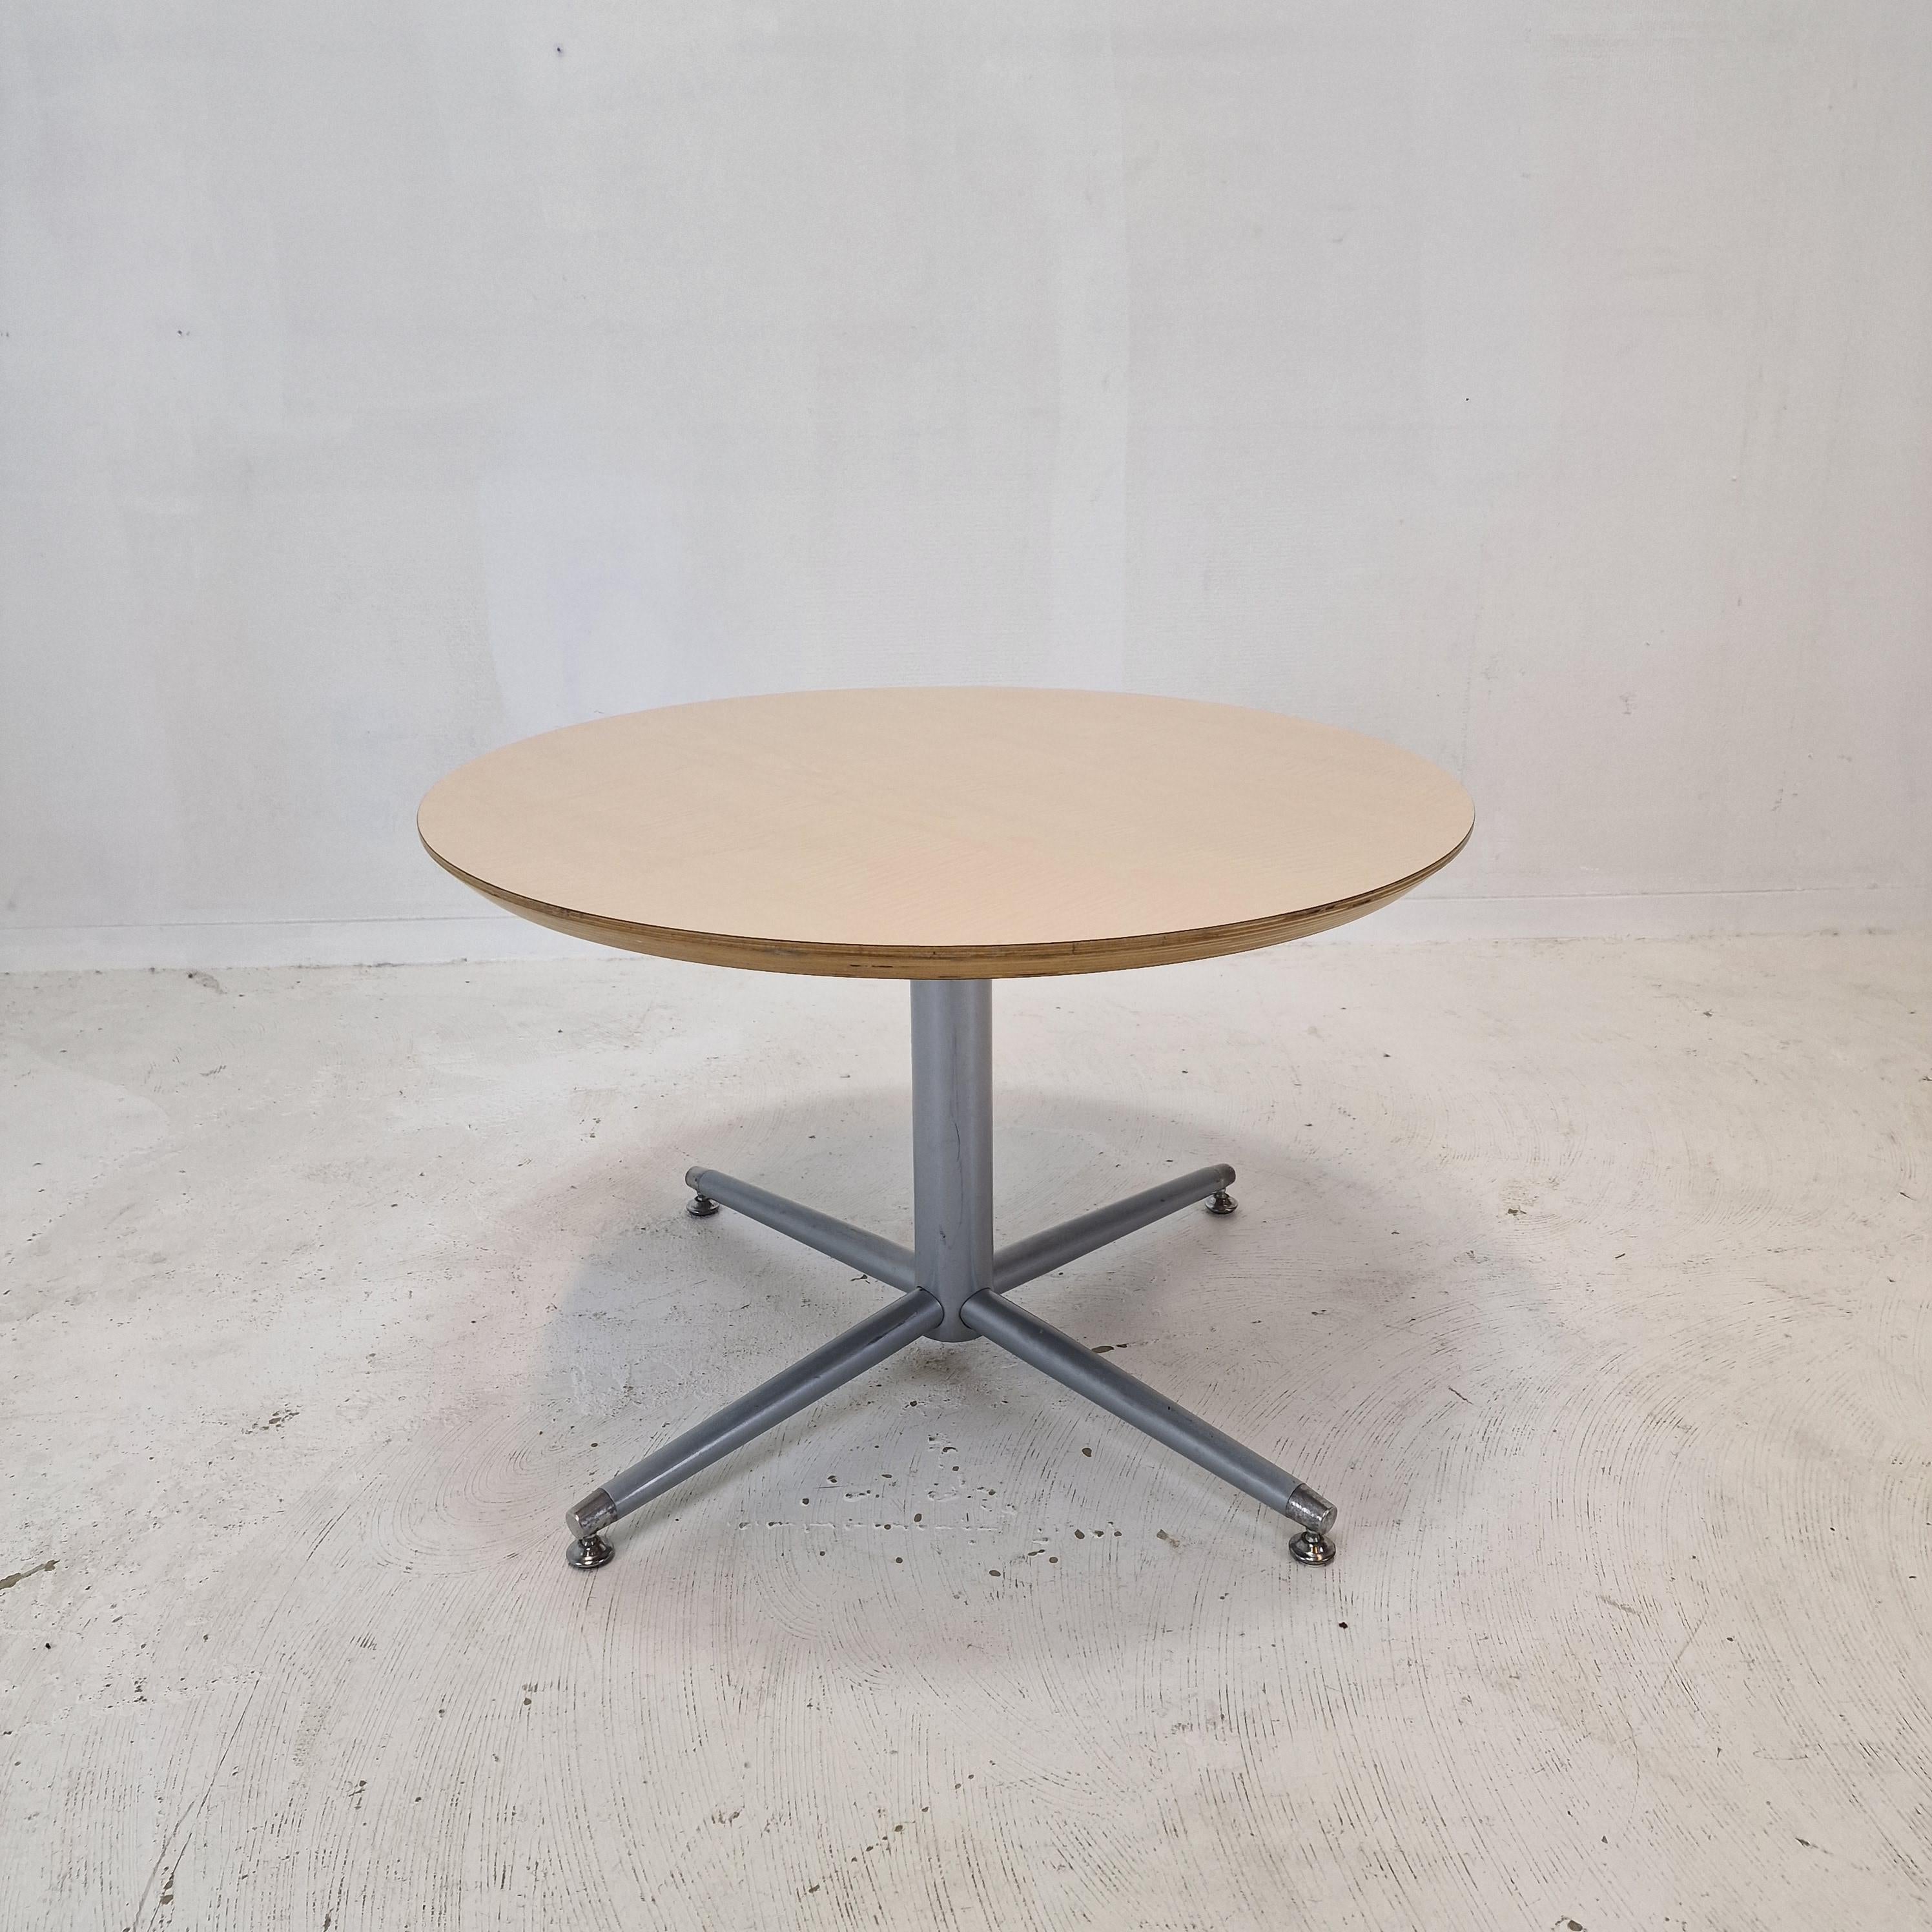 Very nice round coffee table, manufactured by Artifort.
This solid and high quality table is made with the best materials. 

The wooden laminated plate is in good condition with the normal using spots, the same for the metal foot.

It is